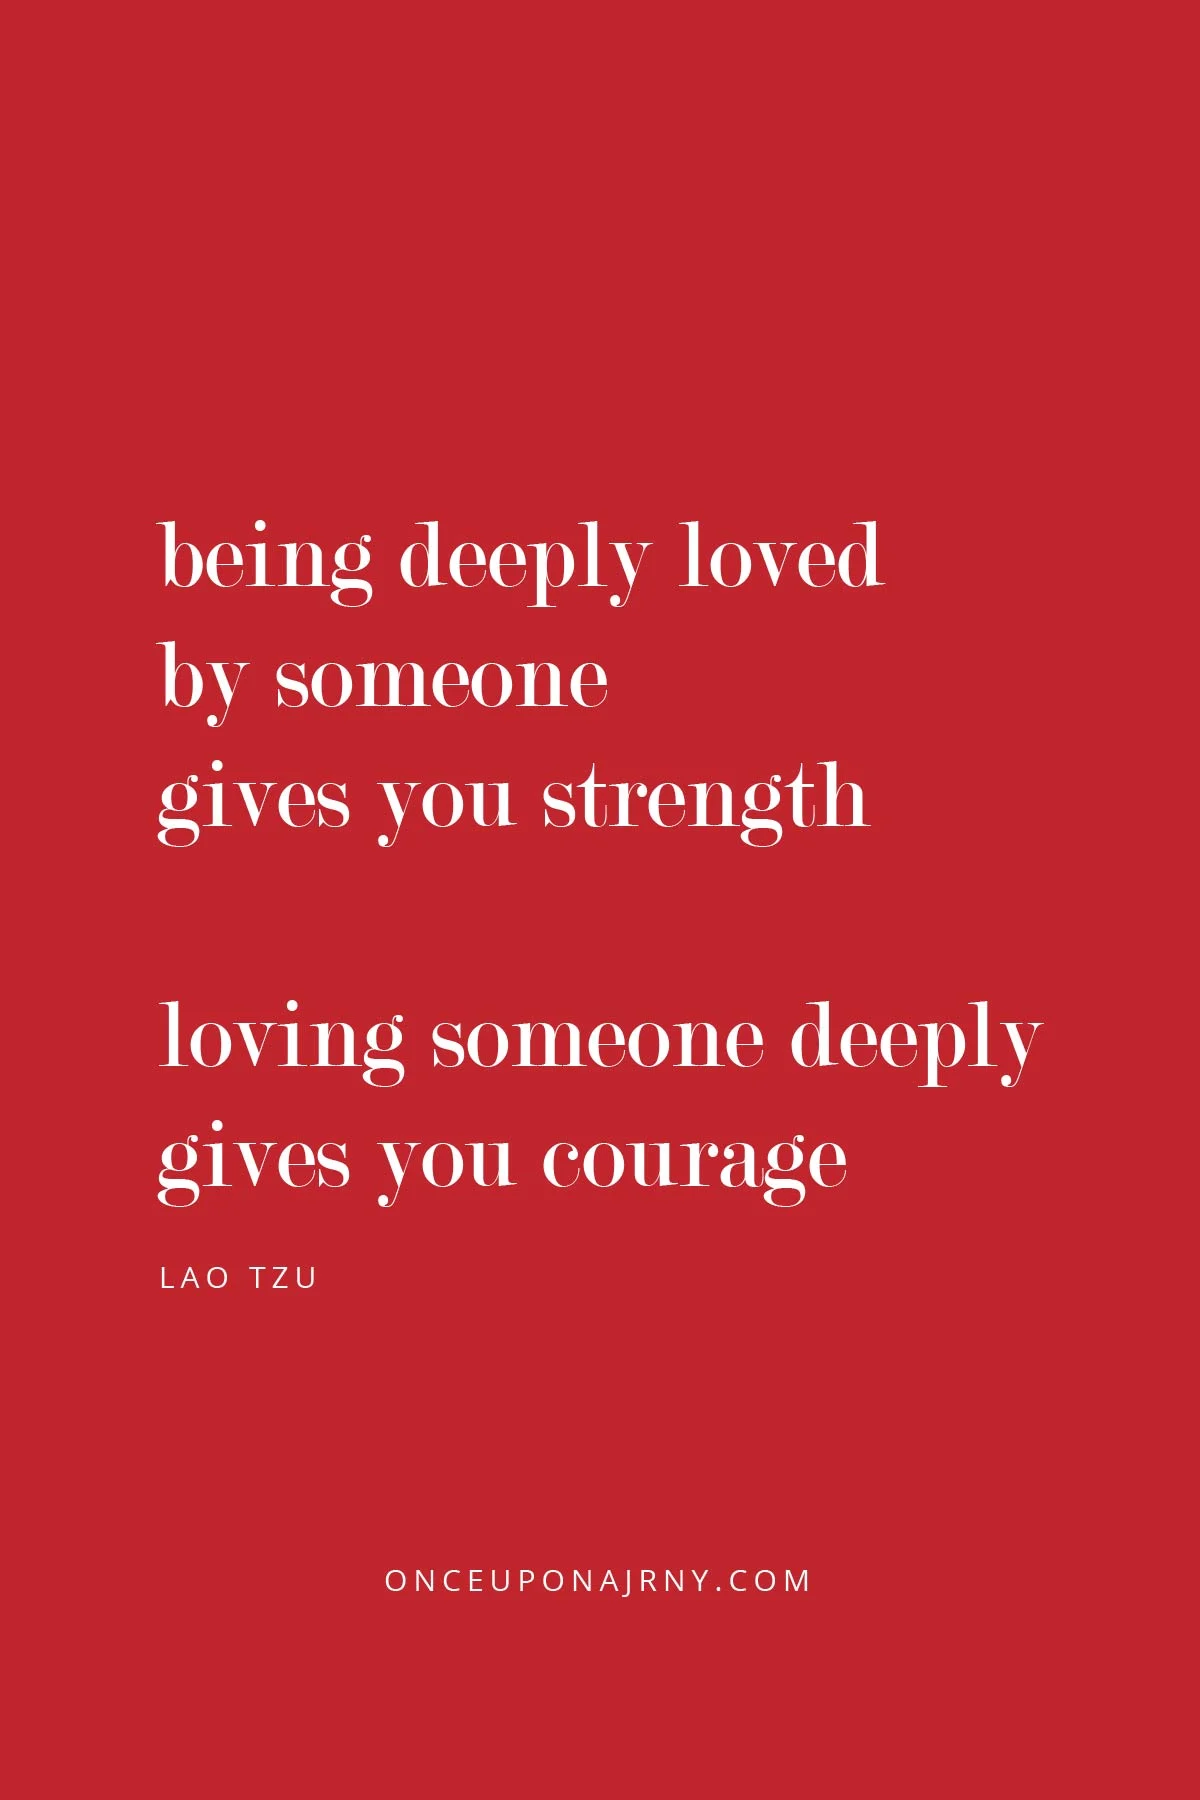 Being deeply loved by someone gives you strength, while loving someone deeply gives you courage. - Lao Tzu love is love quotes